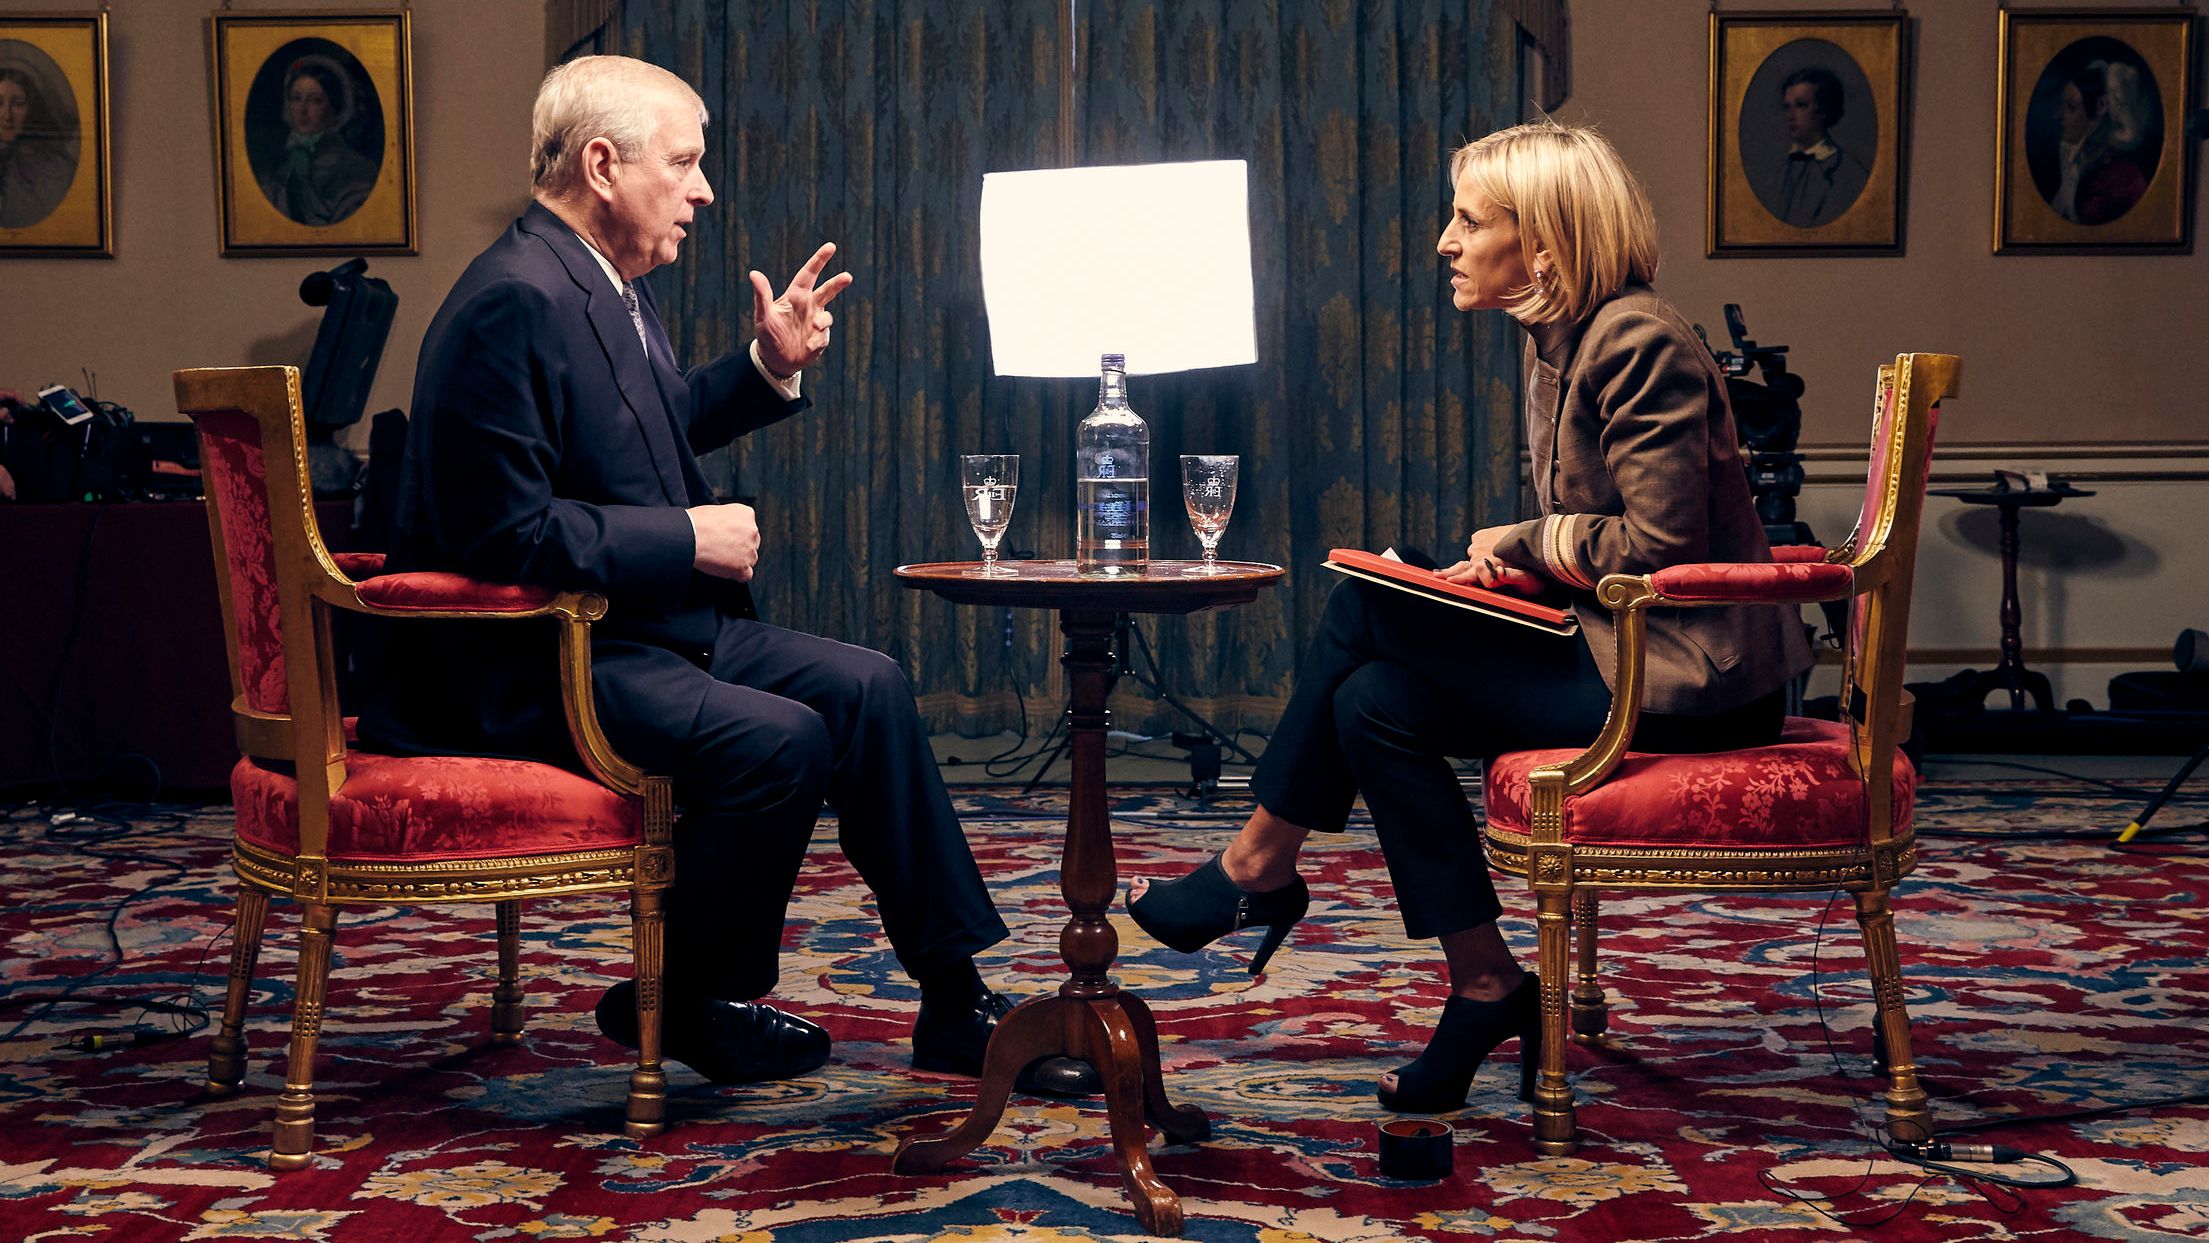 The Duke of York and Emily Maitlis in Buckingham Palace, November 14, 2019. “I thought the security services were going to turn up and say, ‘Give us your memory cards’”